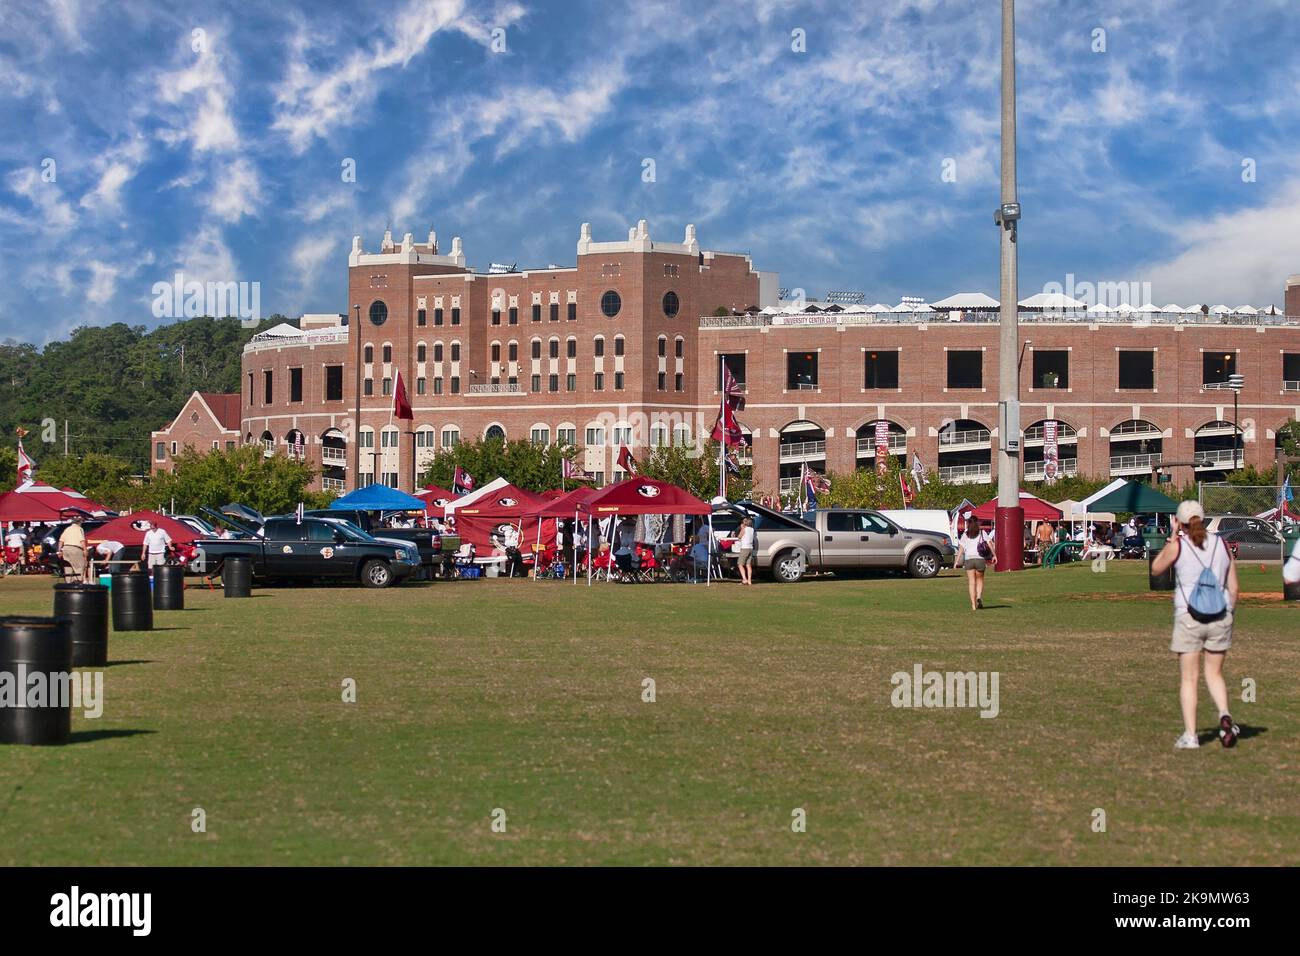 Tallahassee, Florida - August 26, 2009:  Fans tailgating outside Doak Campbell Stadium before a Florida State University football game. Stock Photo